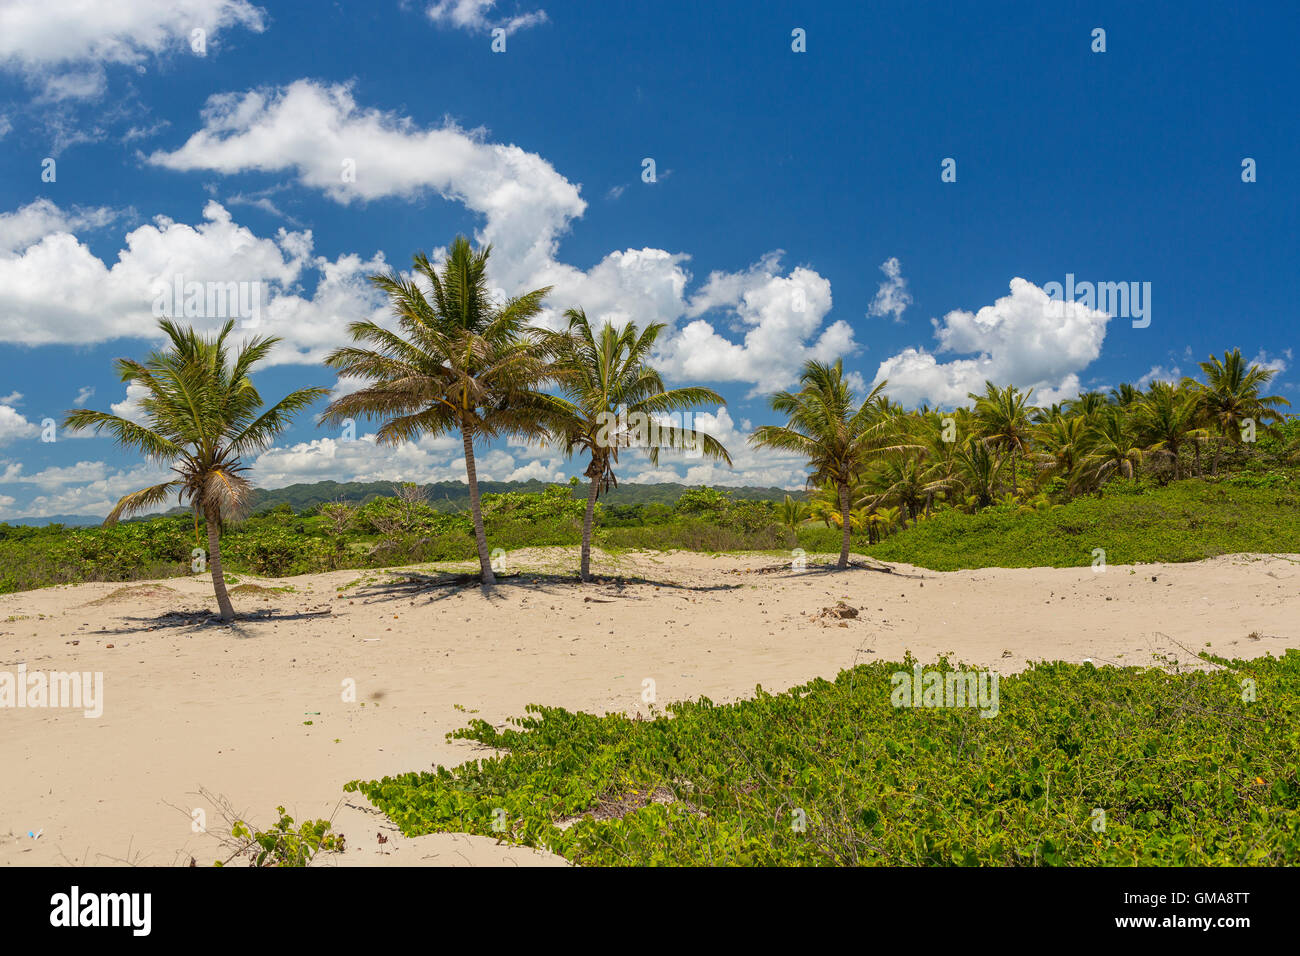 DOMINICAN REPUBLIC - Beach landscape with palm trees at mouth of Yasica River, near Cabarete. Stock Photo